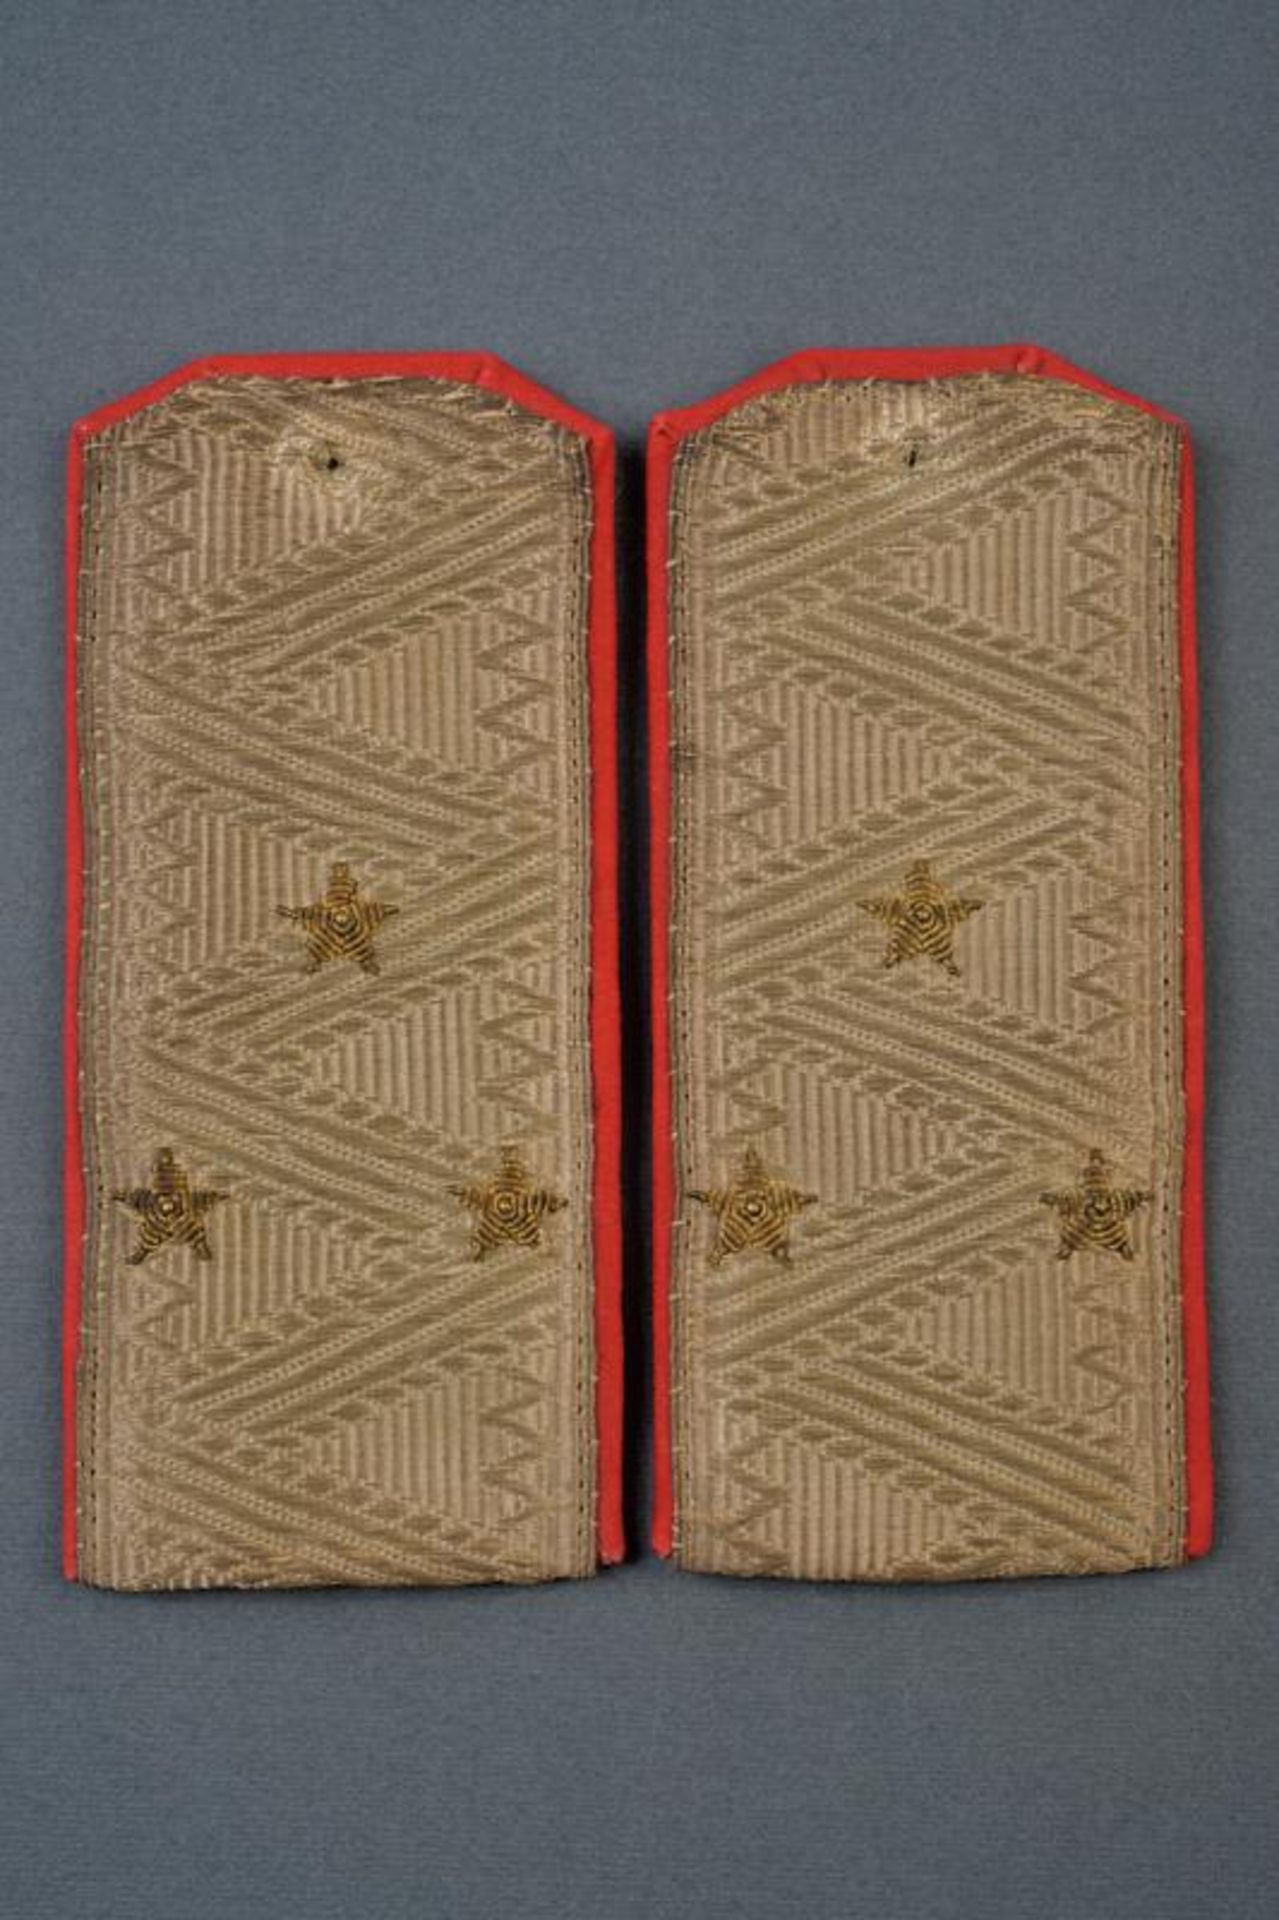 A pair of shoulder boards